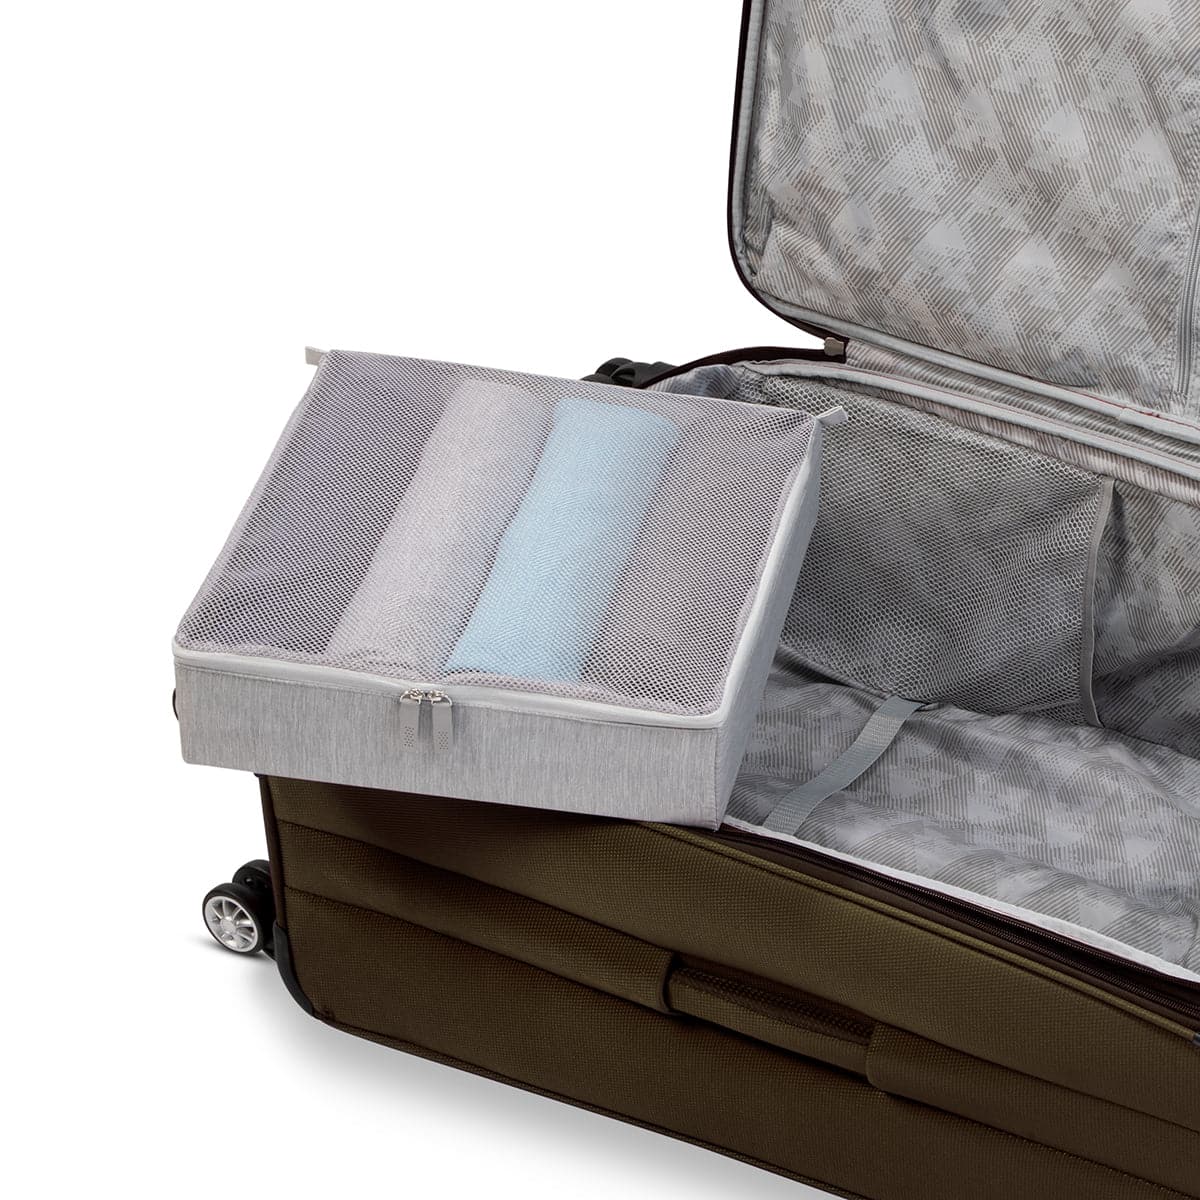 Ricardo Beverly Hills Hermosa Soft Side Large Check-In Luggage